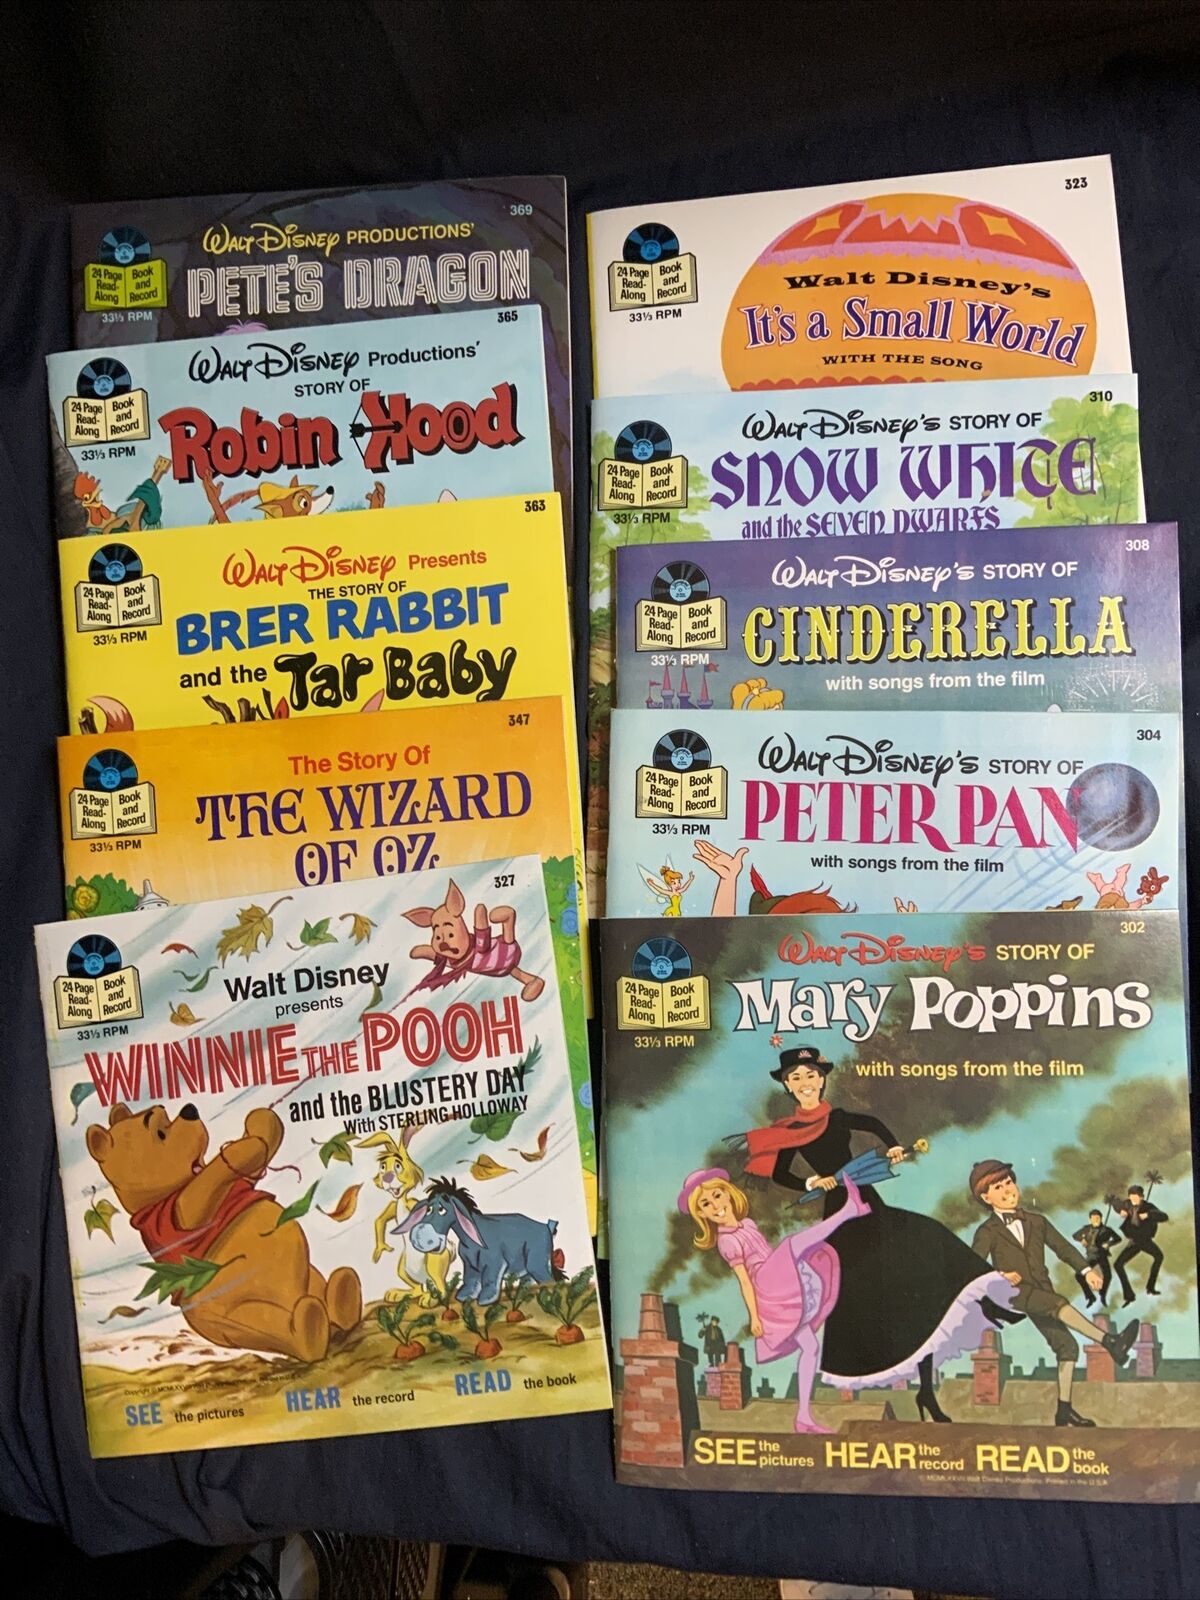 10 NEW Vintage 1977 Disney 33RPM Records And Books 